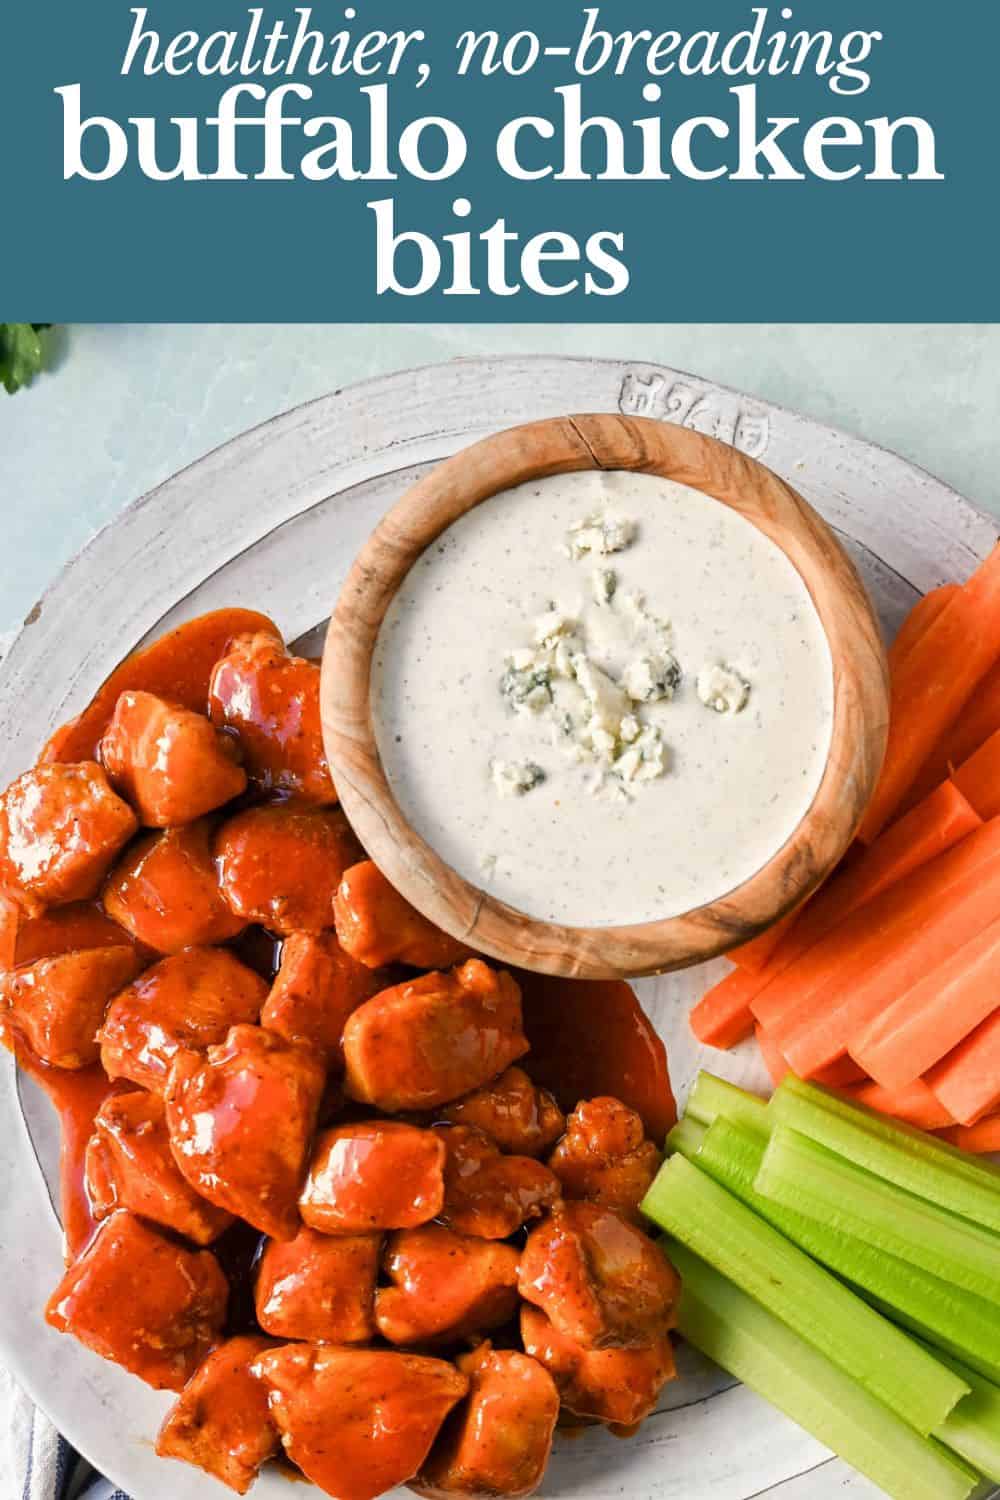 Buffalo Chicken Bites. If you love the flavor of buffalo chicken wings but want a lighter, healthier version, you will love these easy buffalo chicken bites without the breading and no frying.